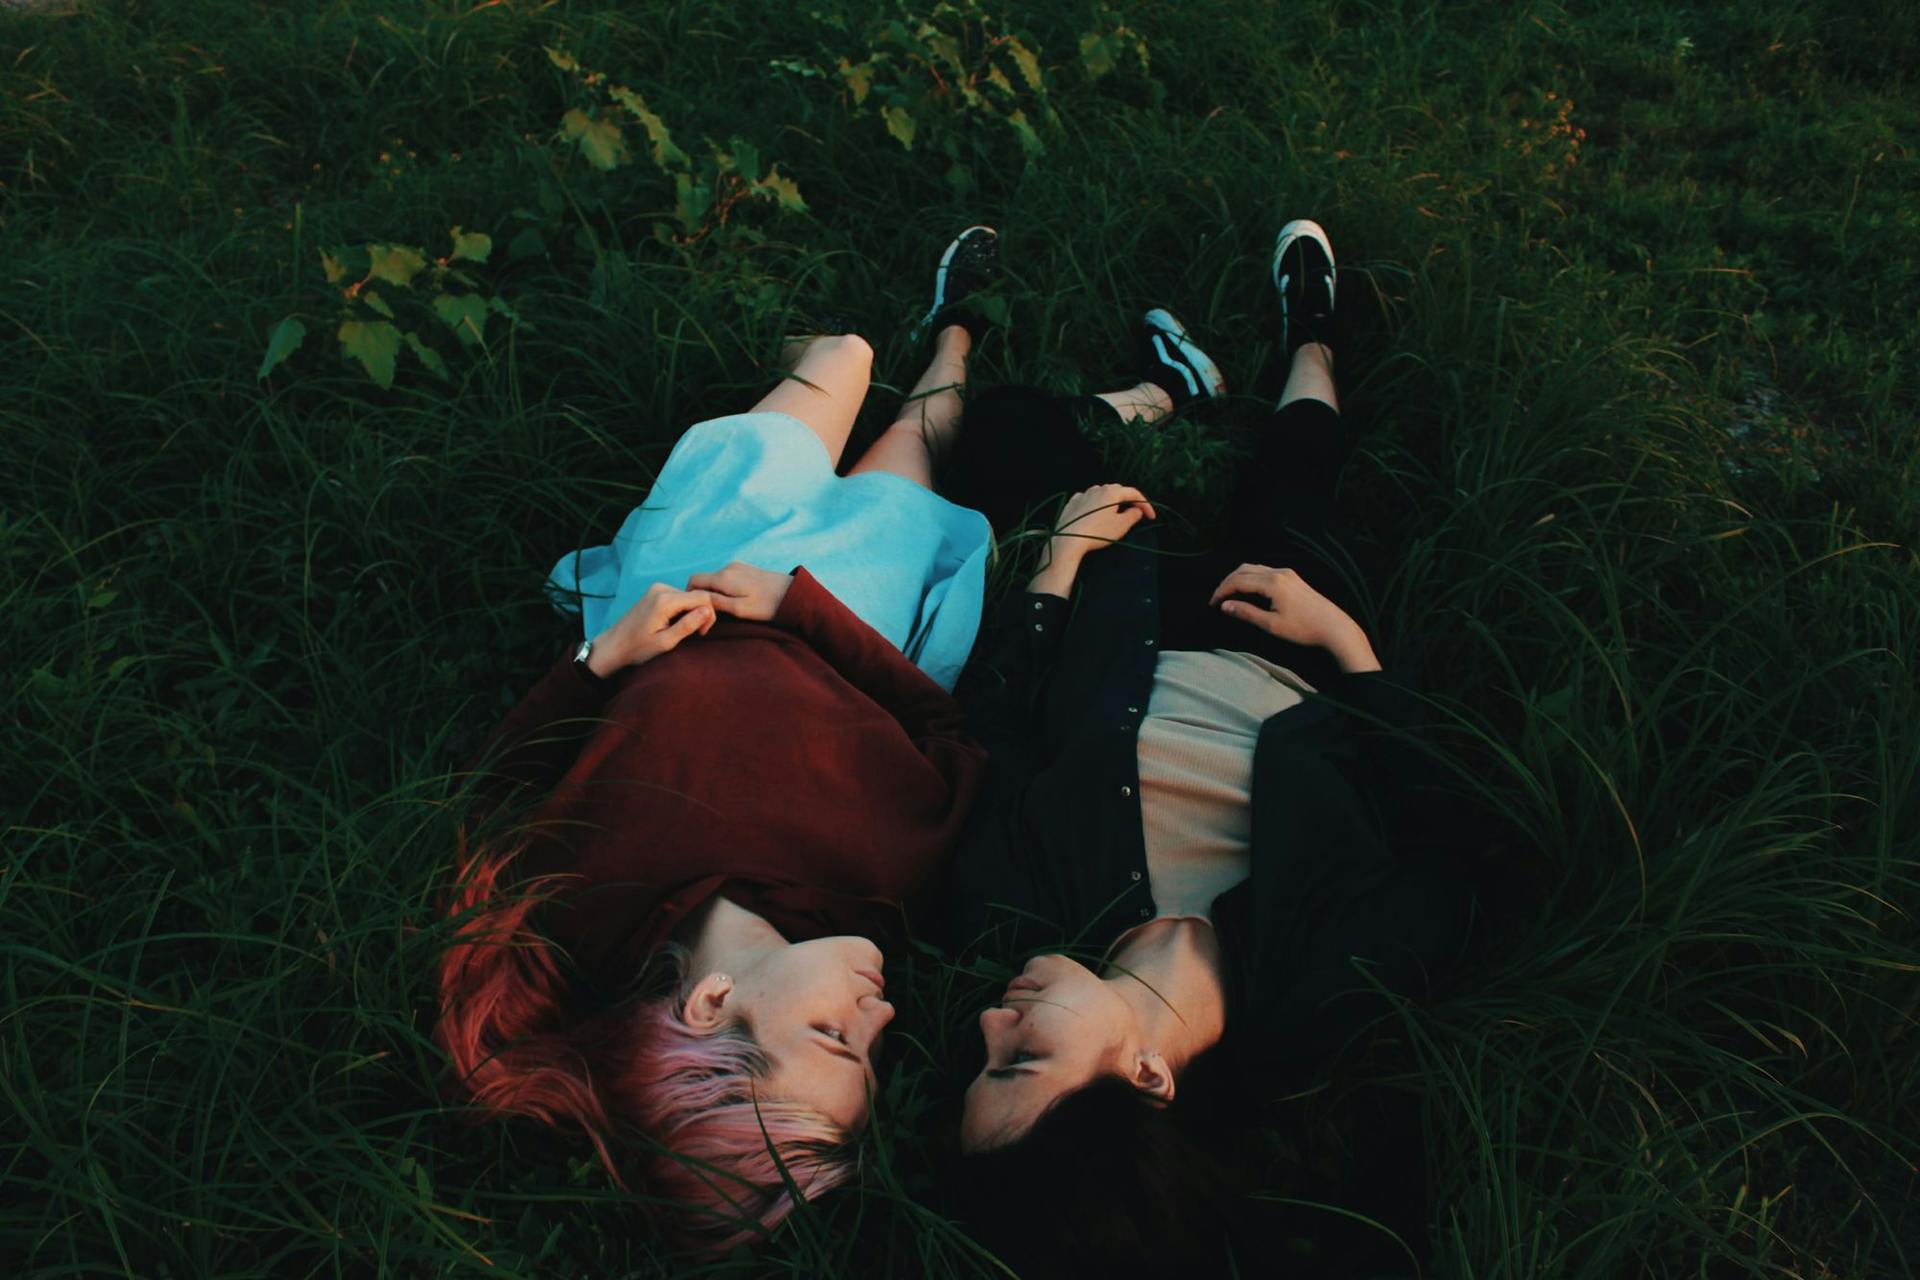 Two women look at each other while laying in the grass